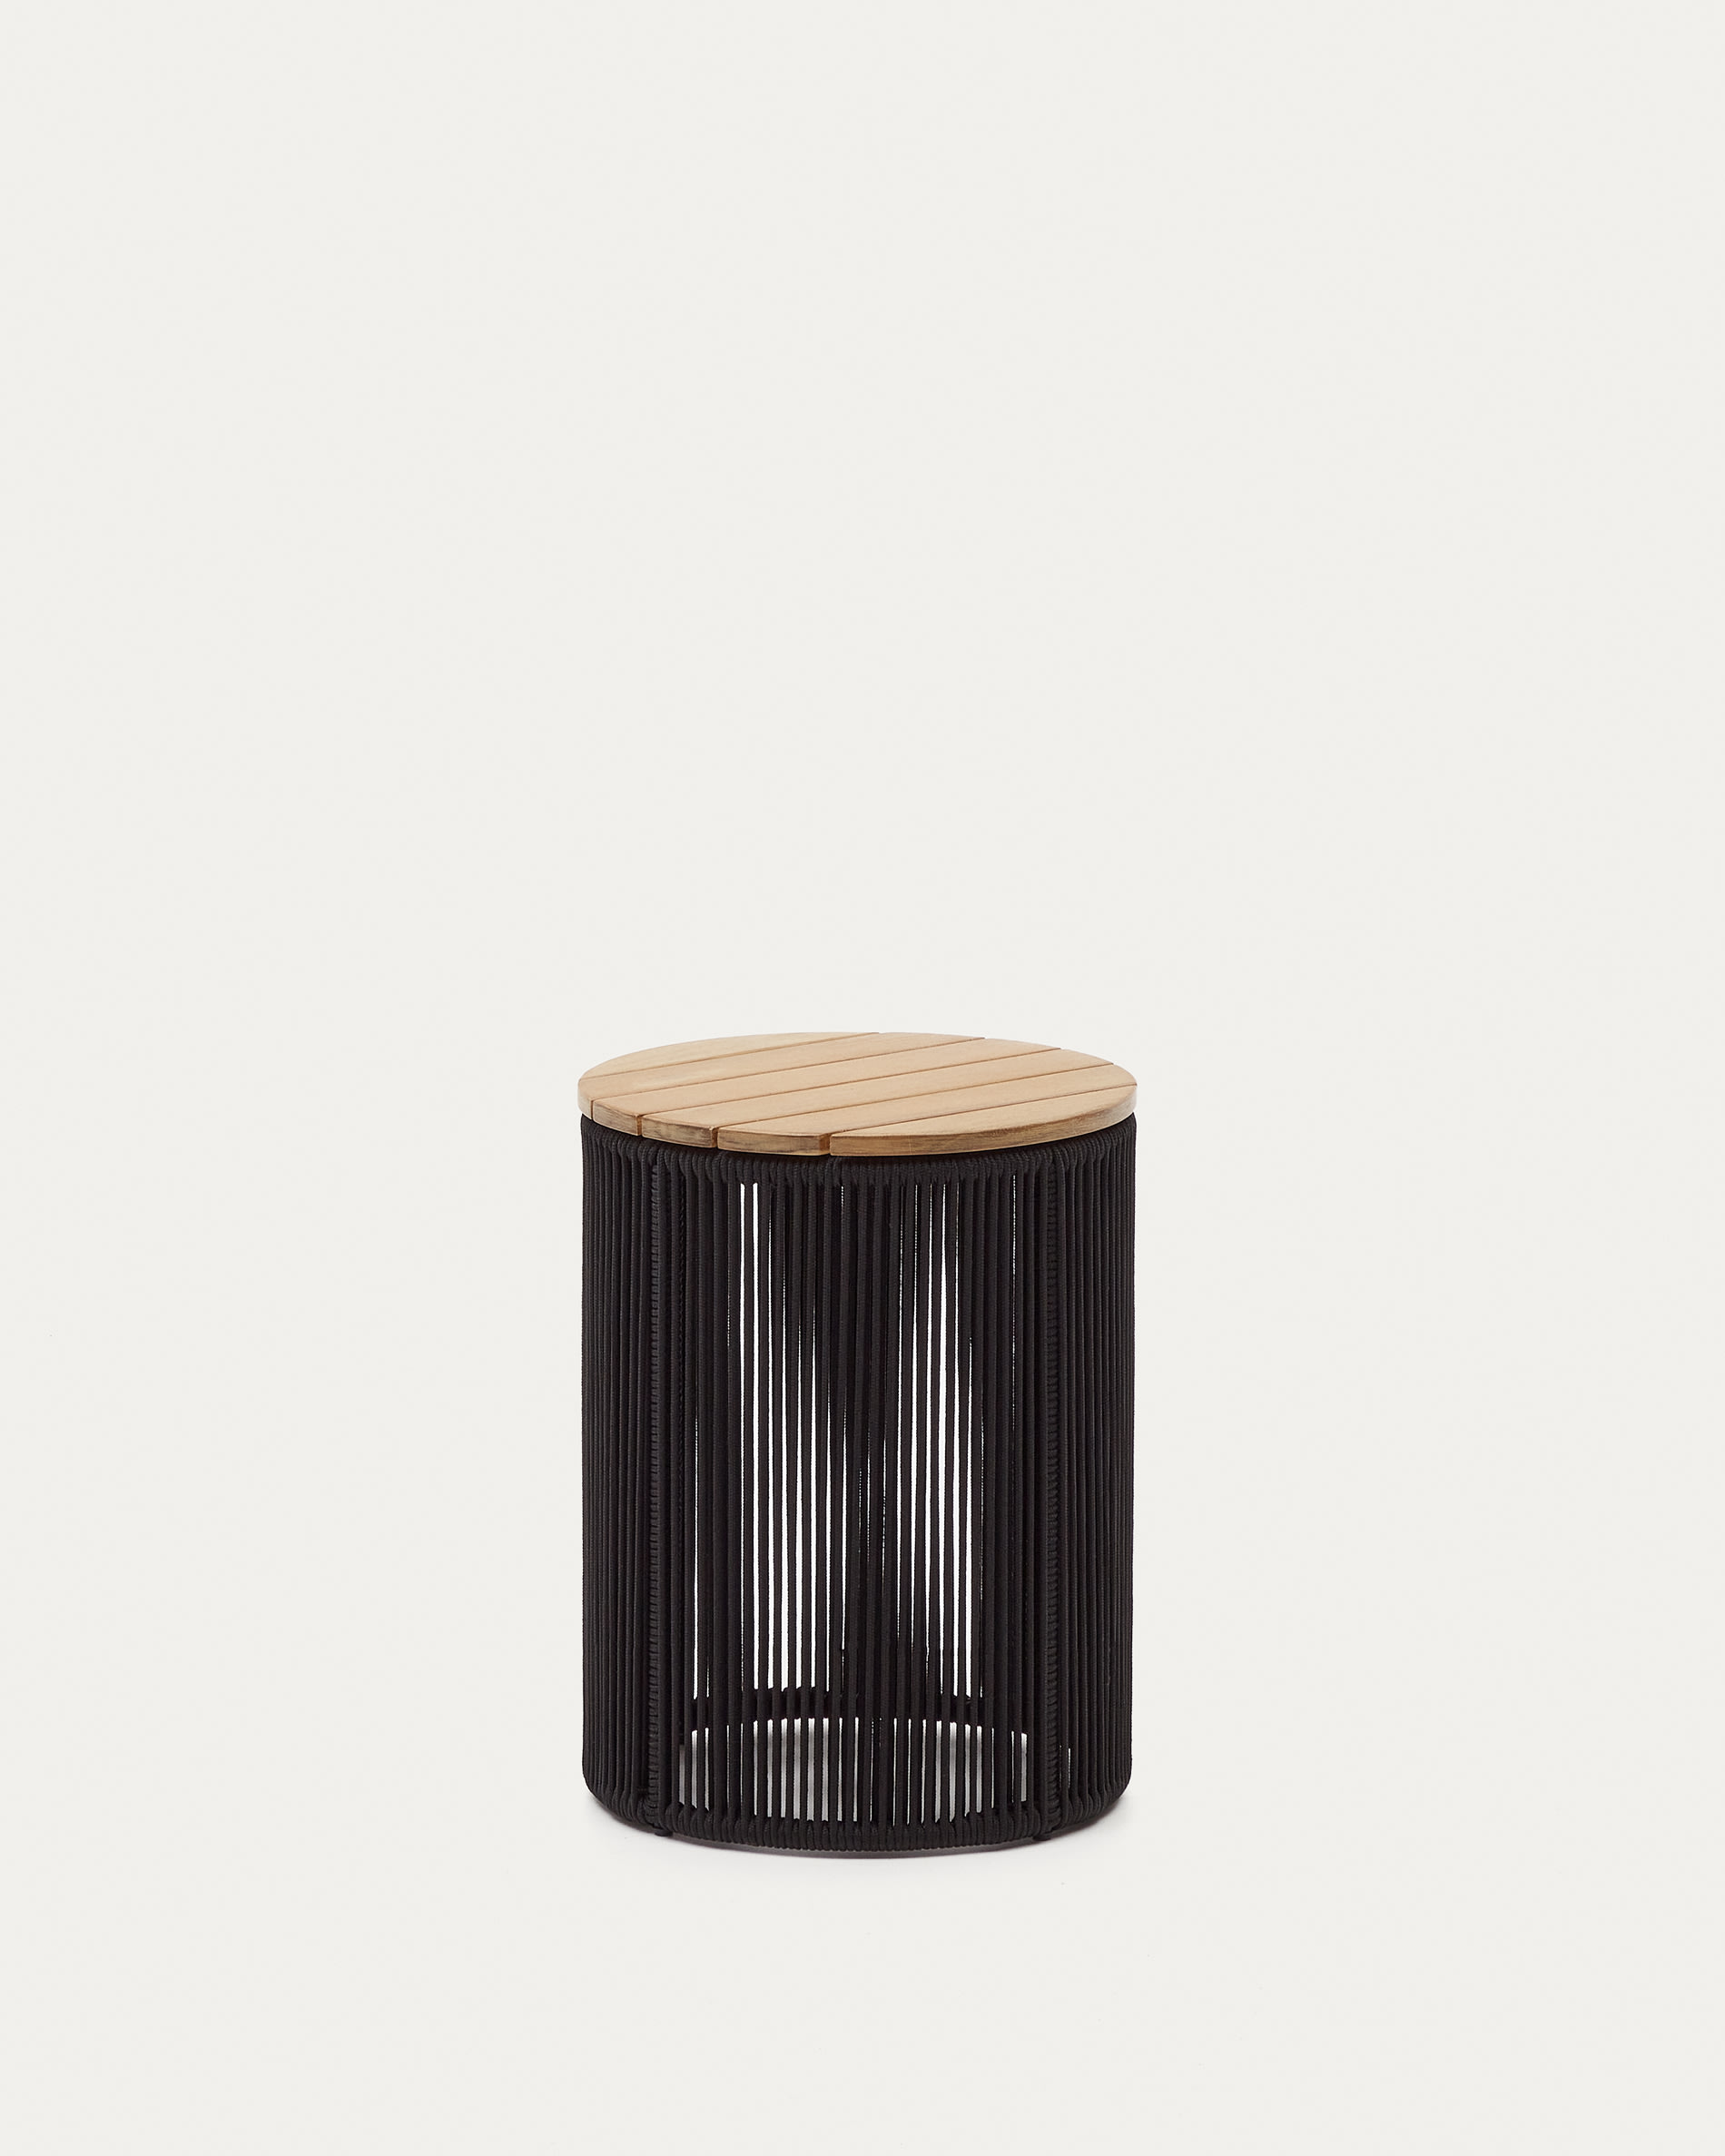 Dandara coffee table made of steel, black cord and 100% FSC solid acacia wood, Ø40 cm